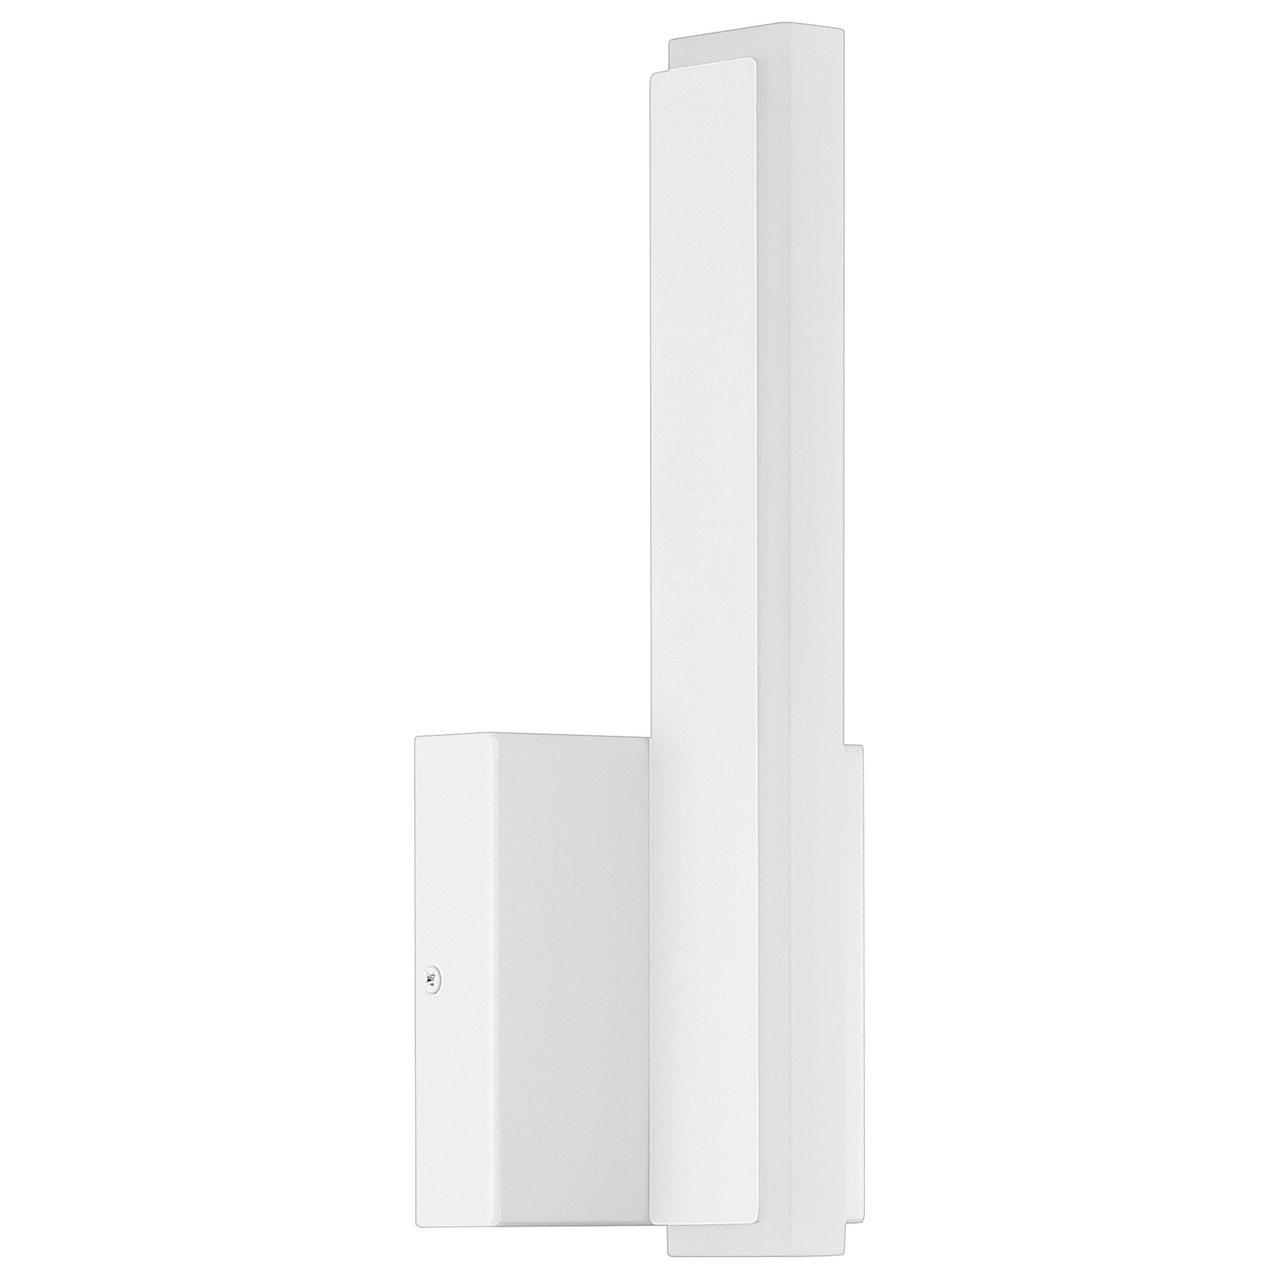 ACCESS LIGHTING 63161LEDD-MWH/ACR 1-Light Dual Voltage LED Wall Sconce, Matte White